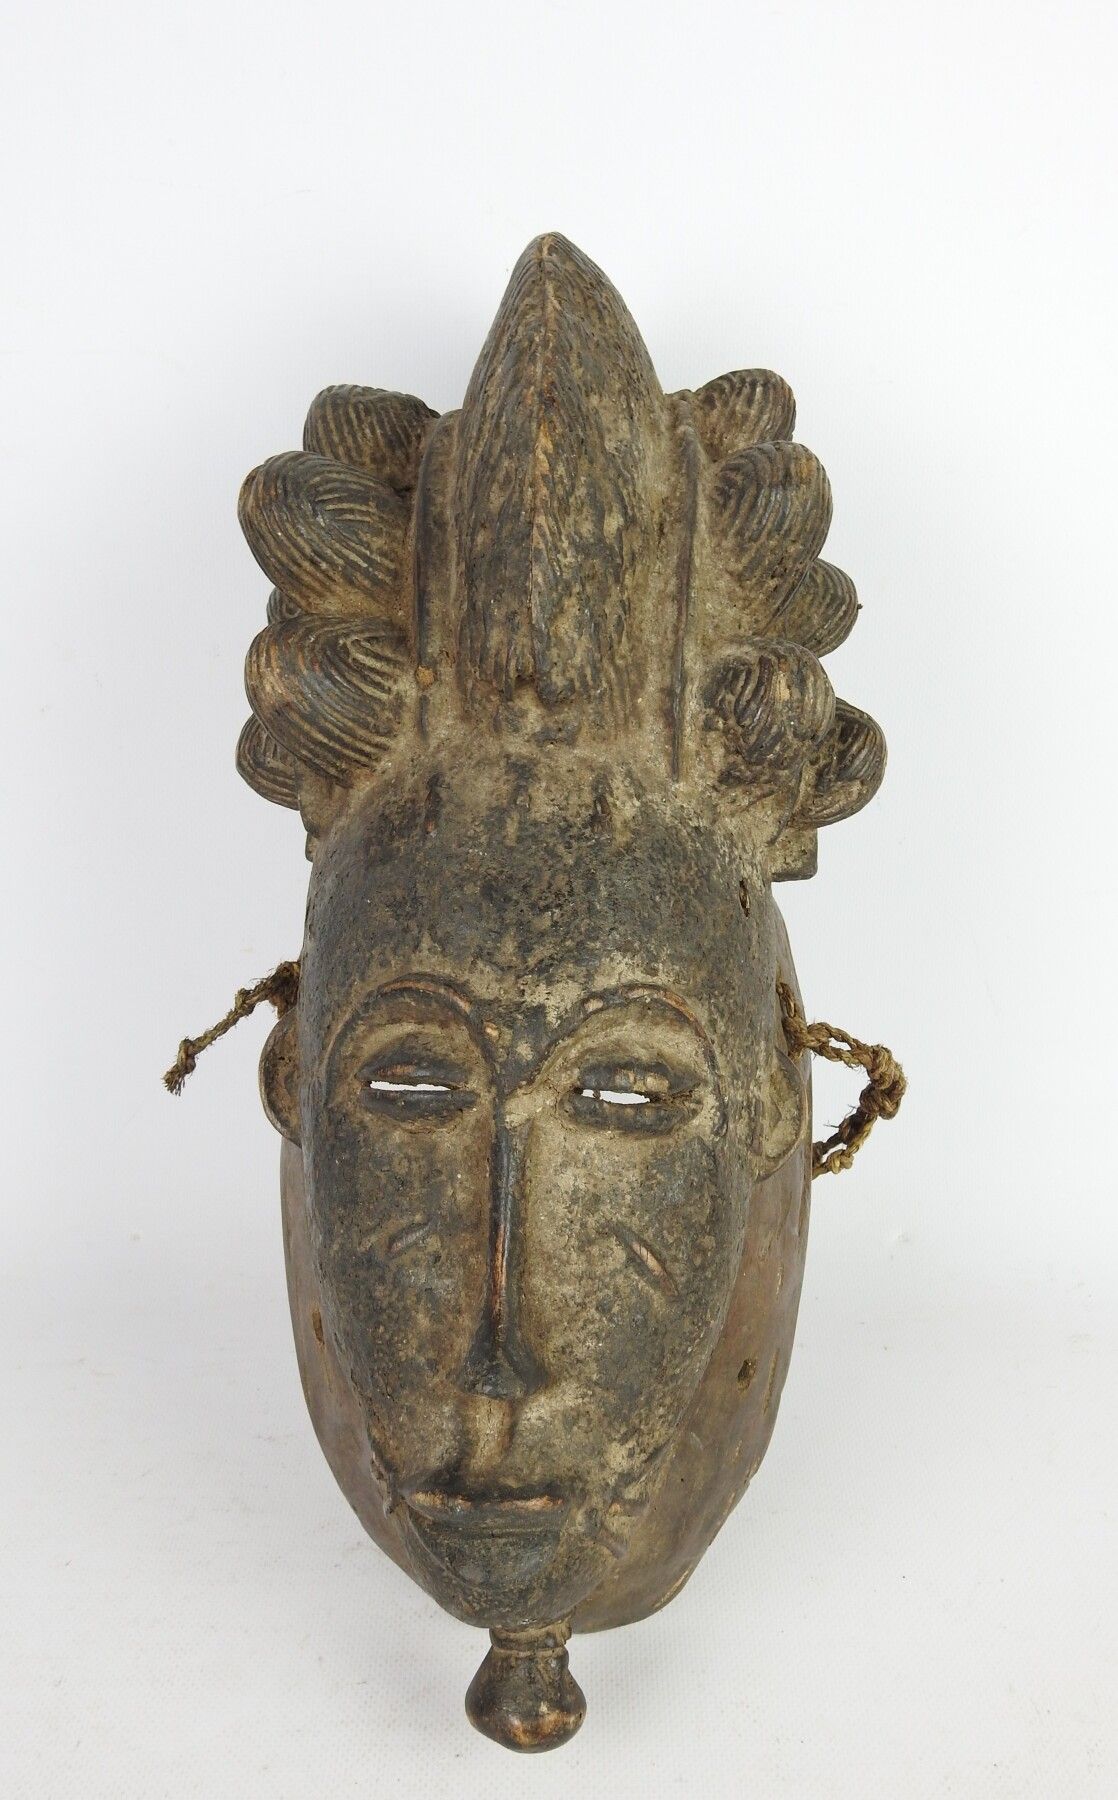 Null BAOULE Ivory Coast. Carved wood with dark patina. Facial mask in very refin&hellip;